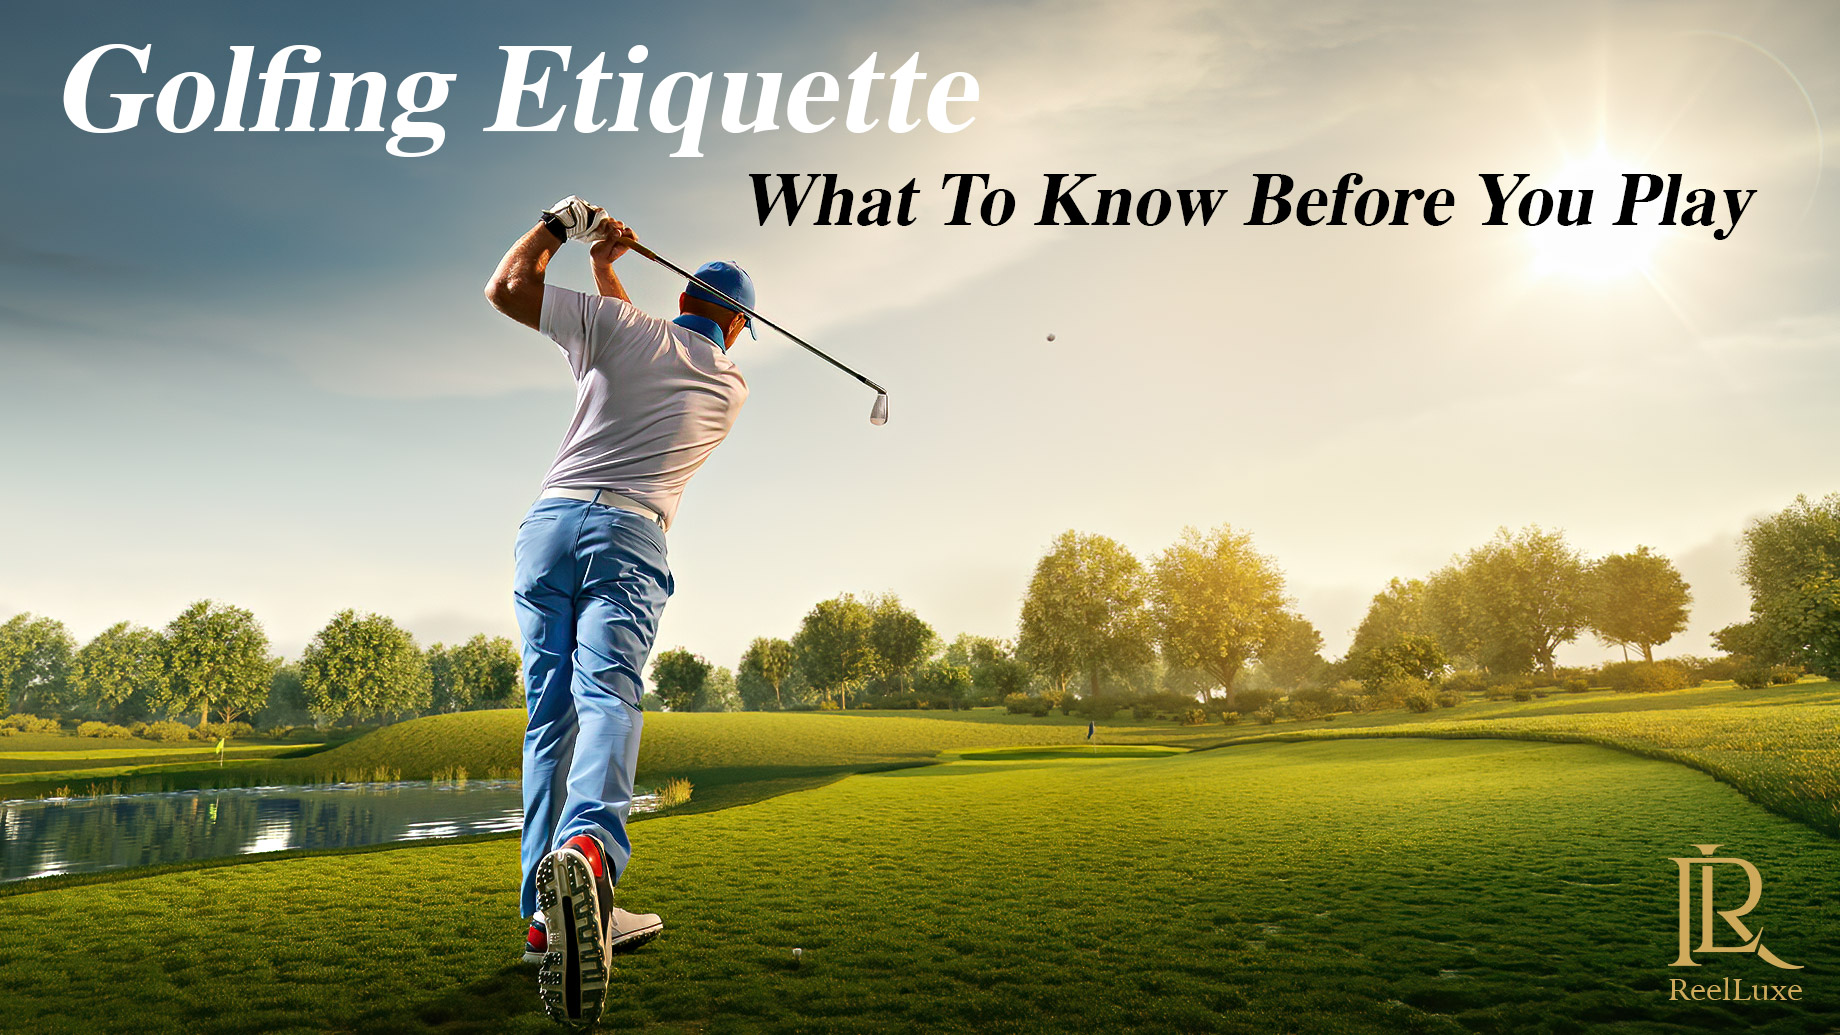 Golfing Etiquette - What To Know Before You Play